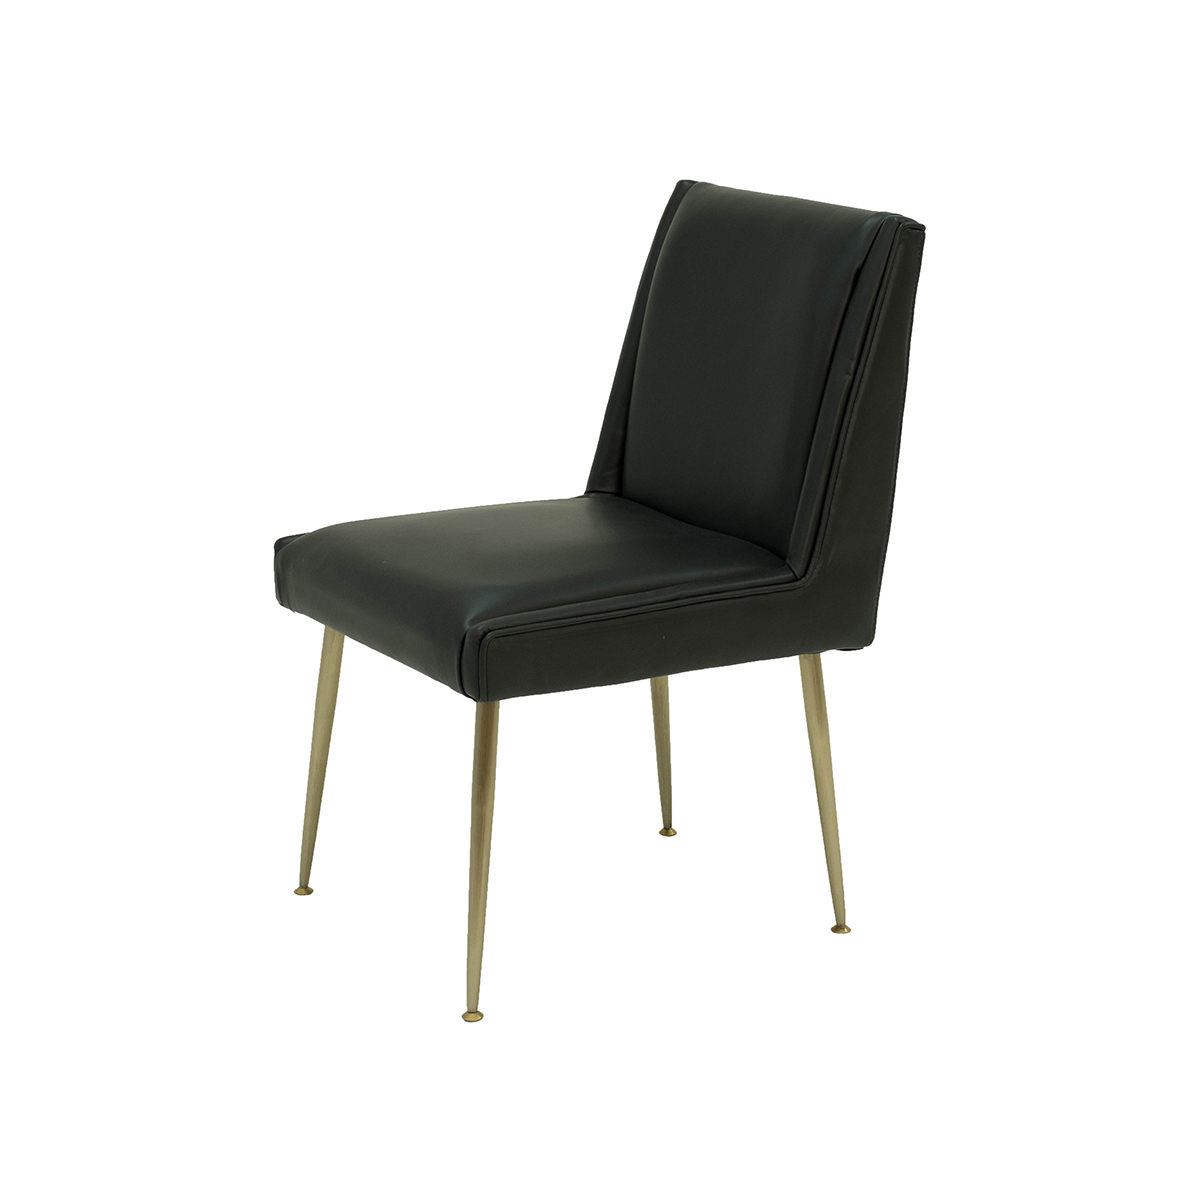 Art Dining Chair – Black Leather